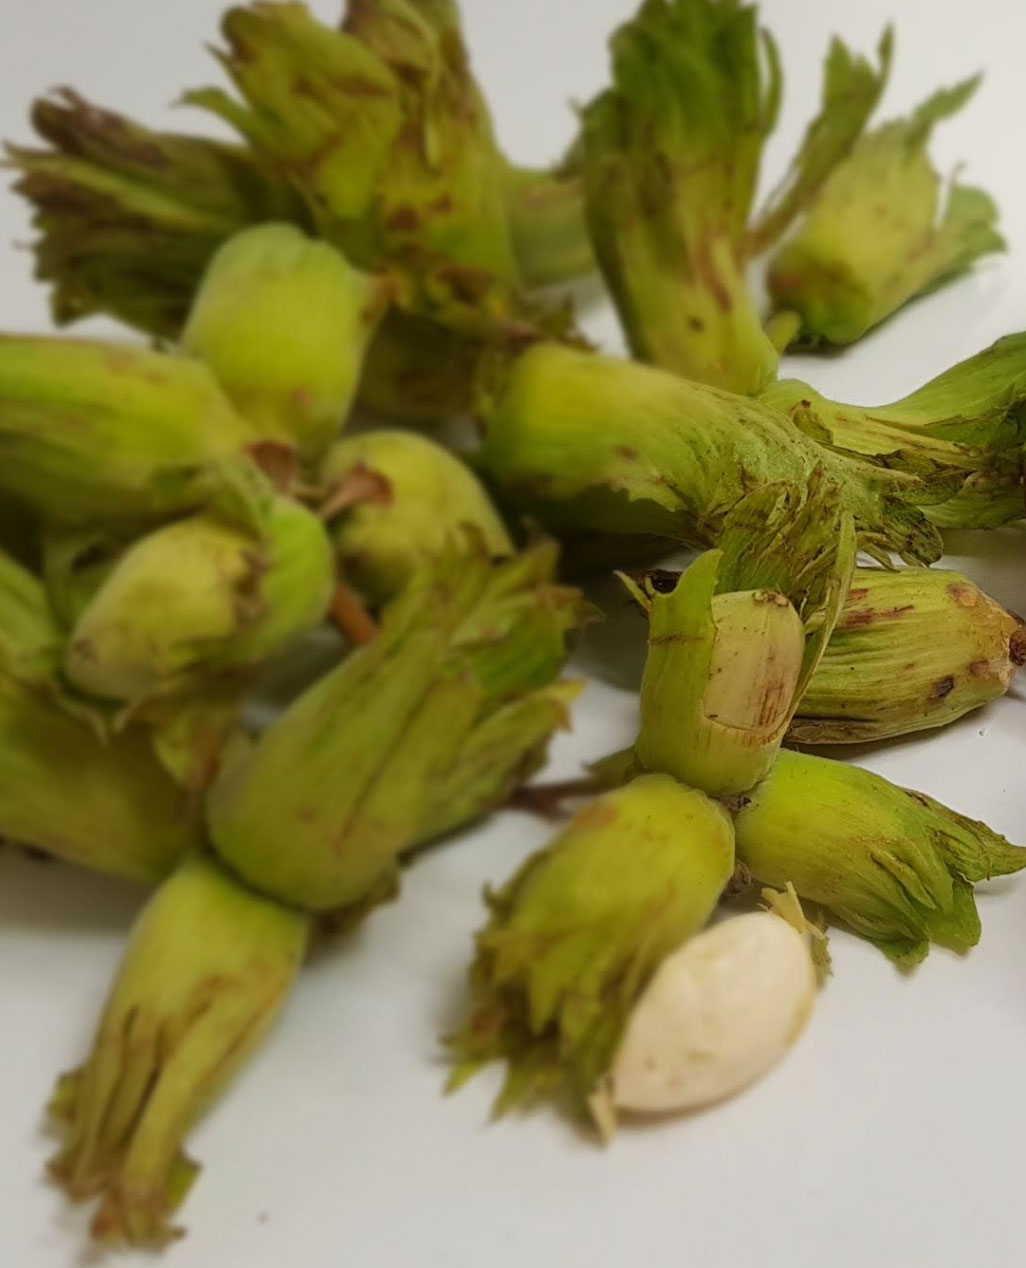 smith-and-brock-cob-nuts